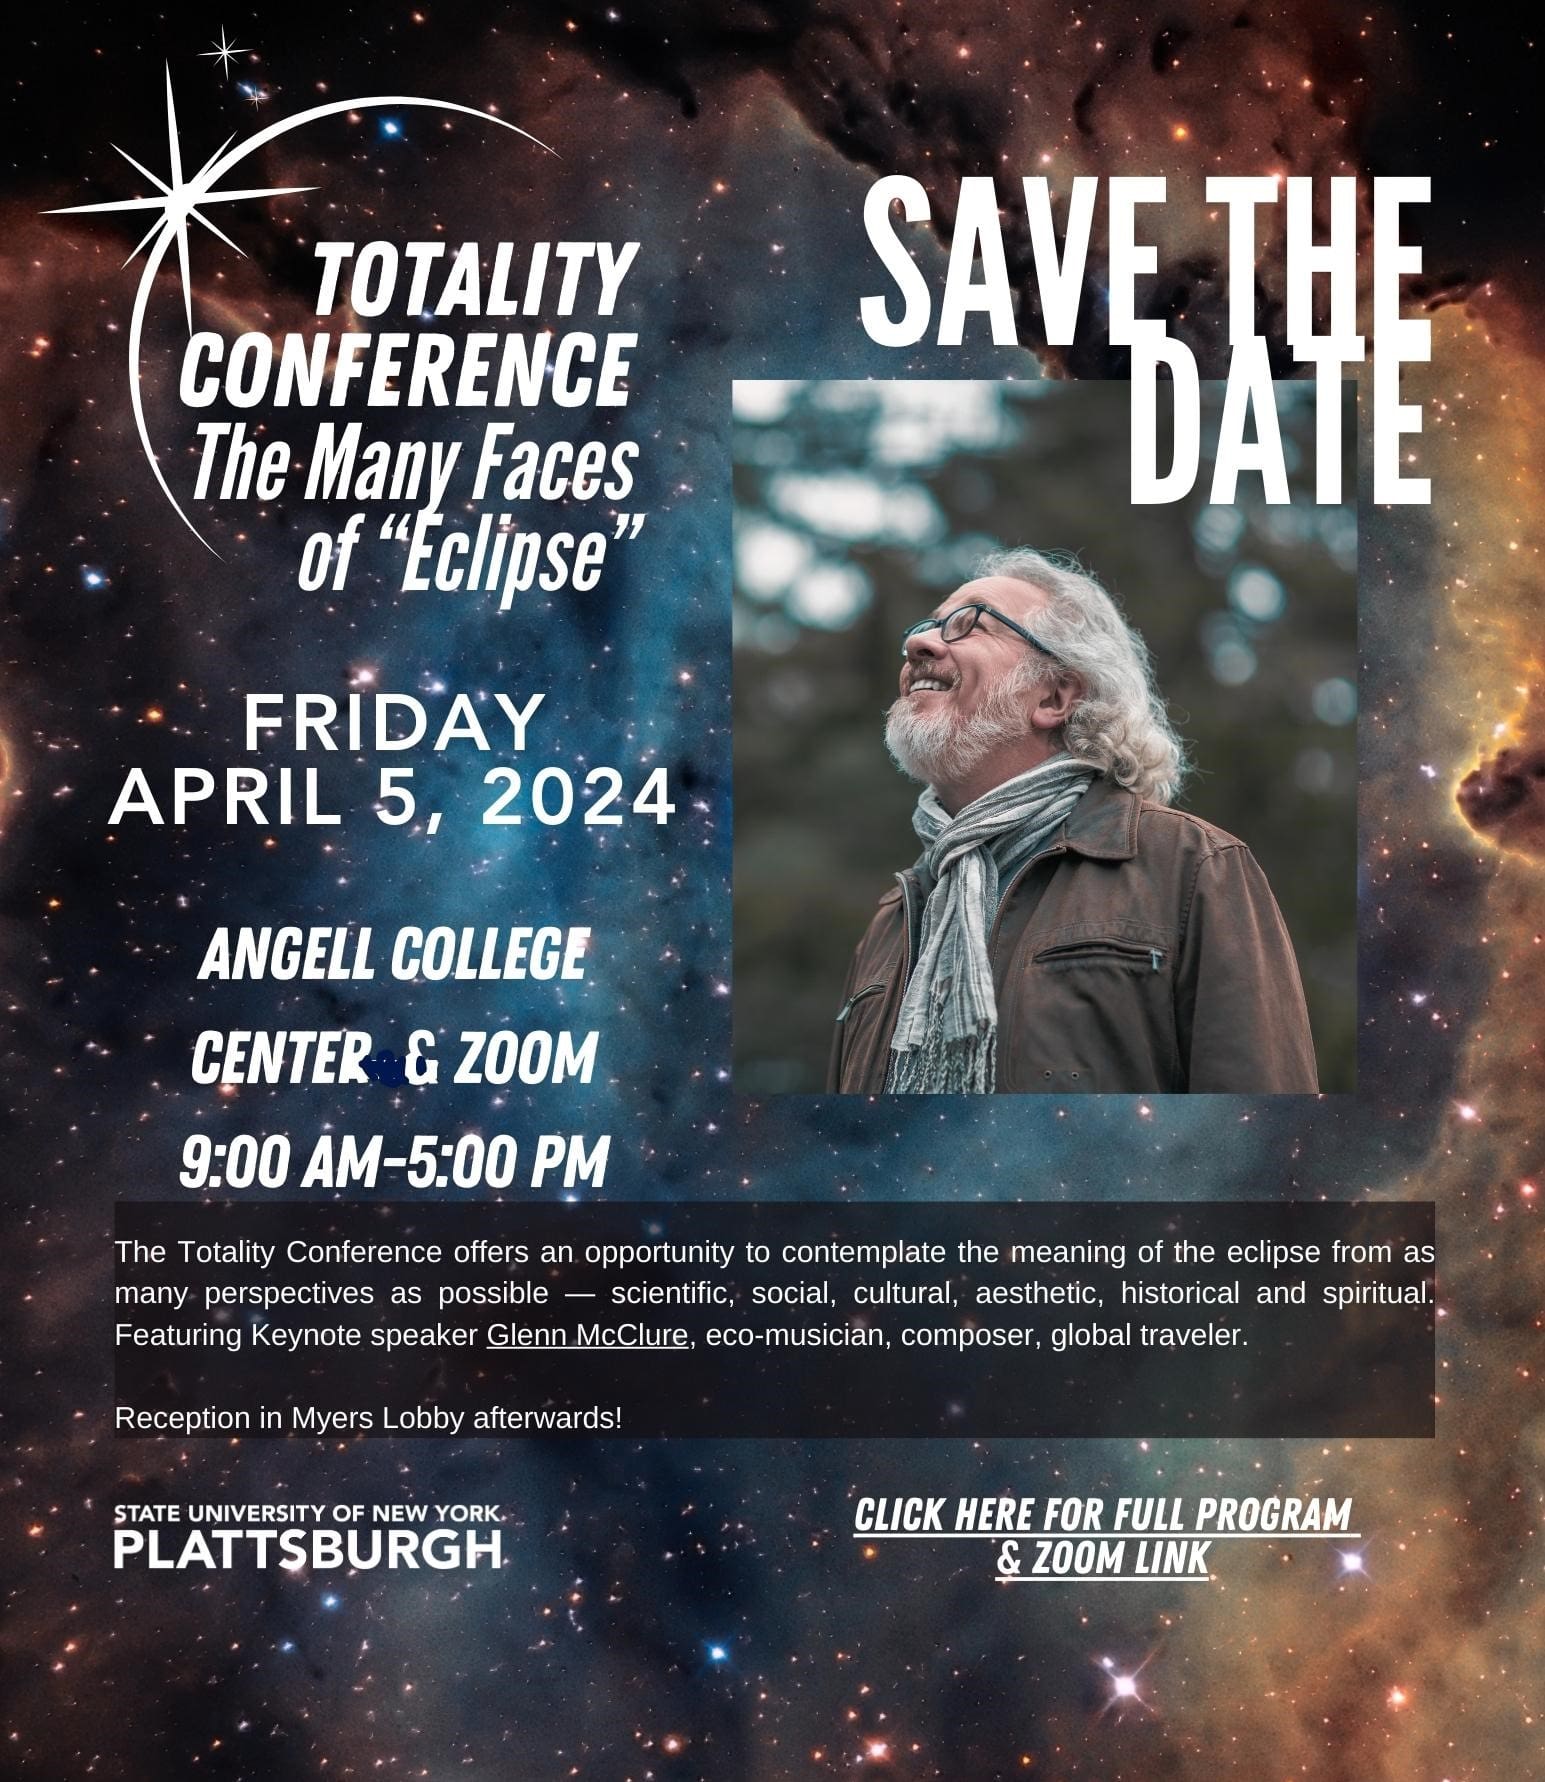 Totality Conference - April 5, 2024